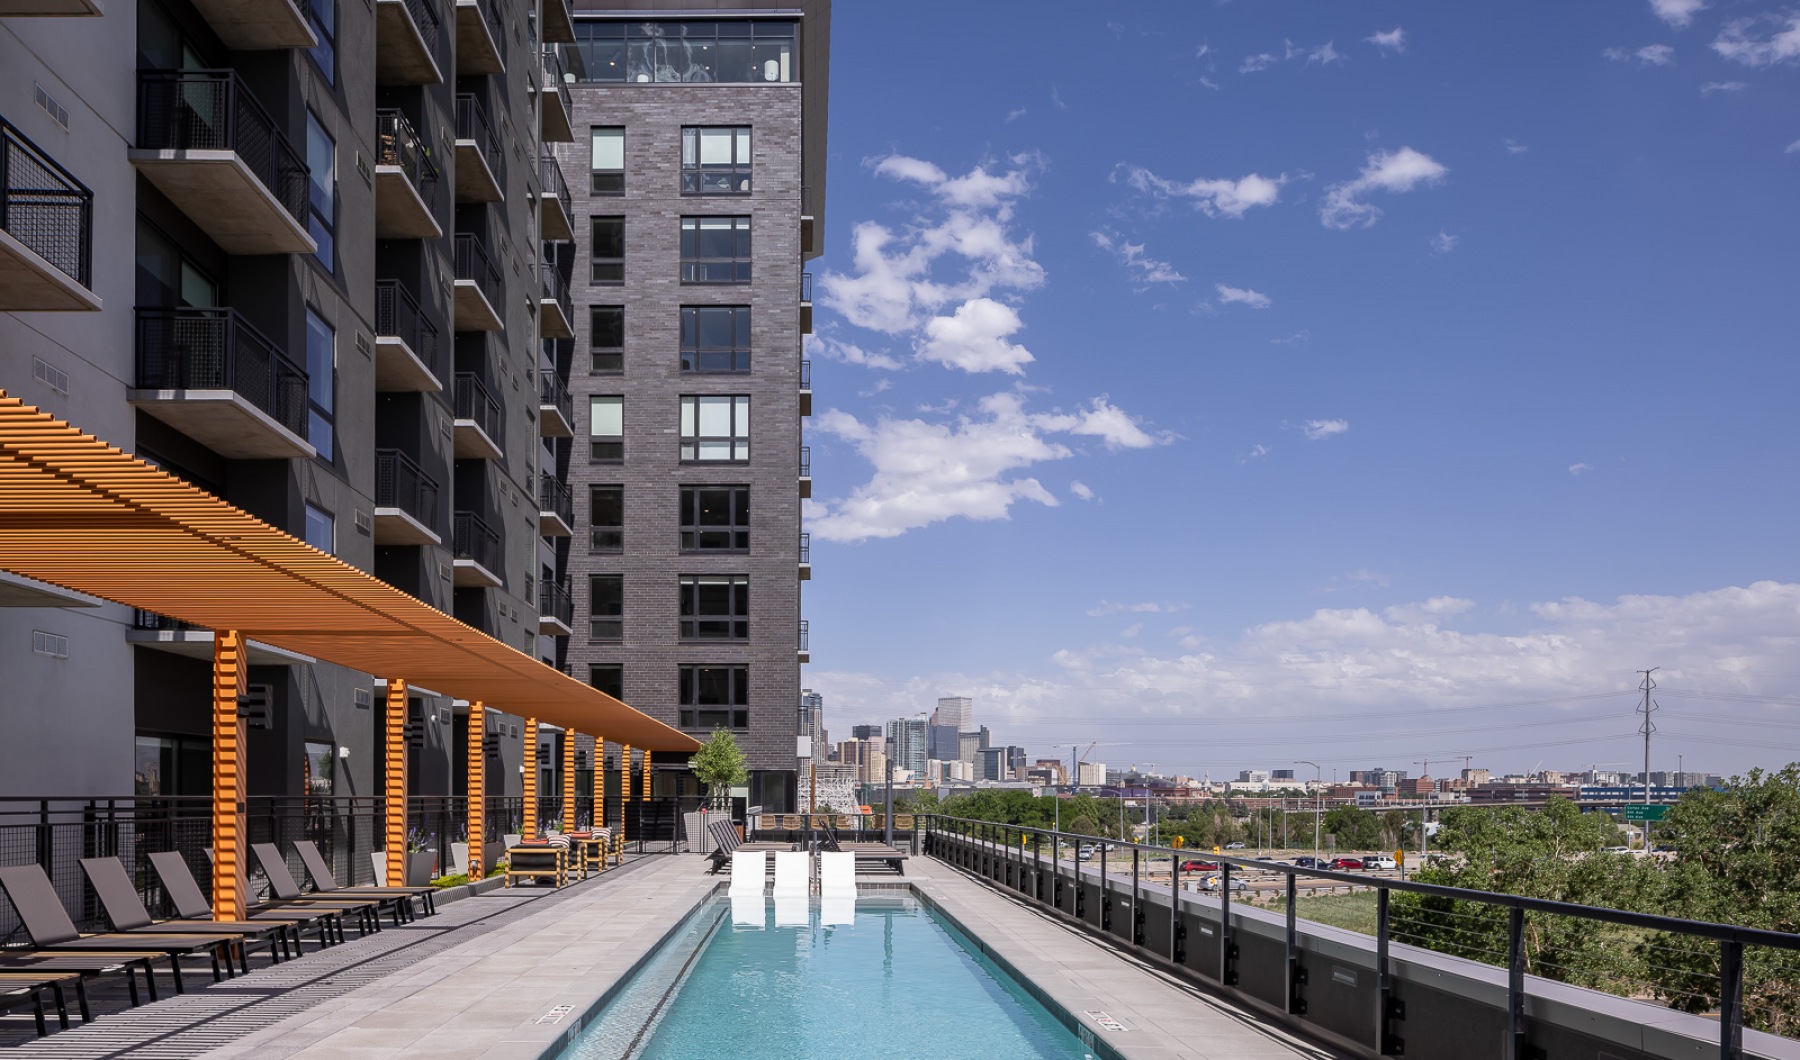 Outdoor pool deck with view of downtwon